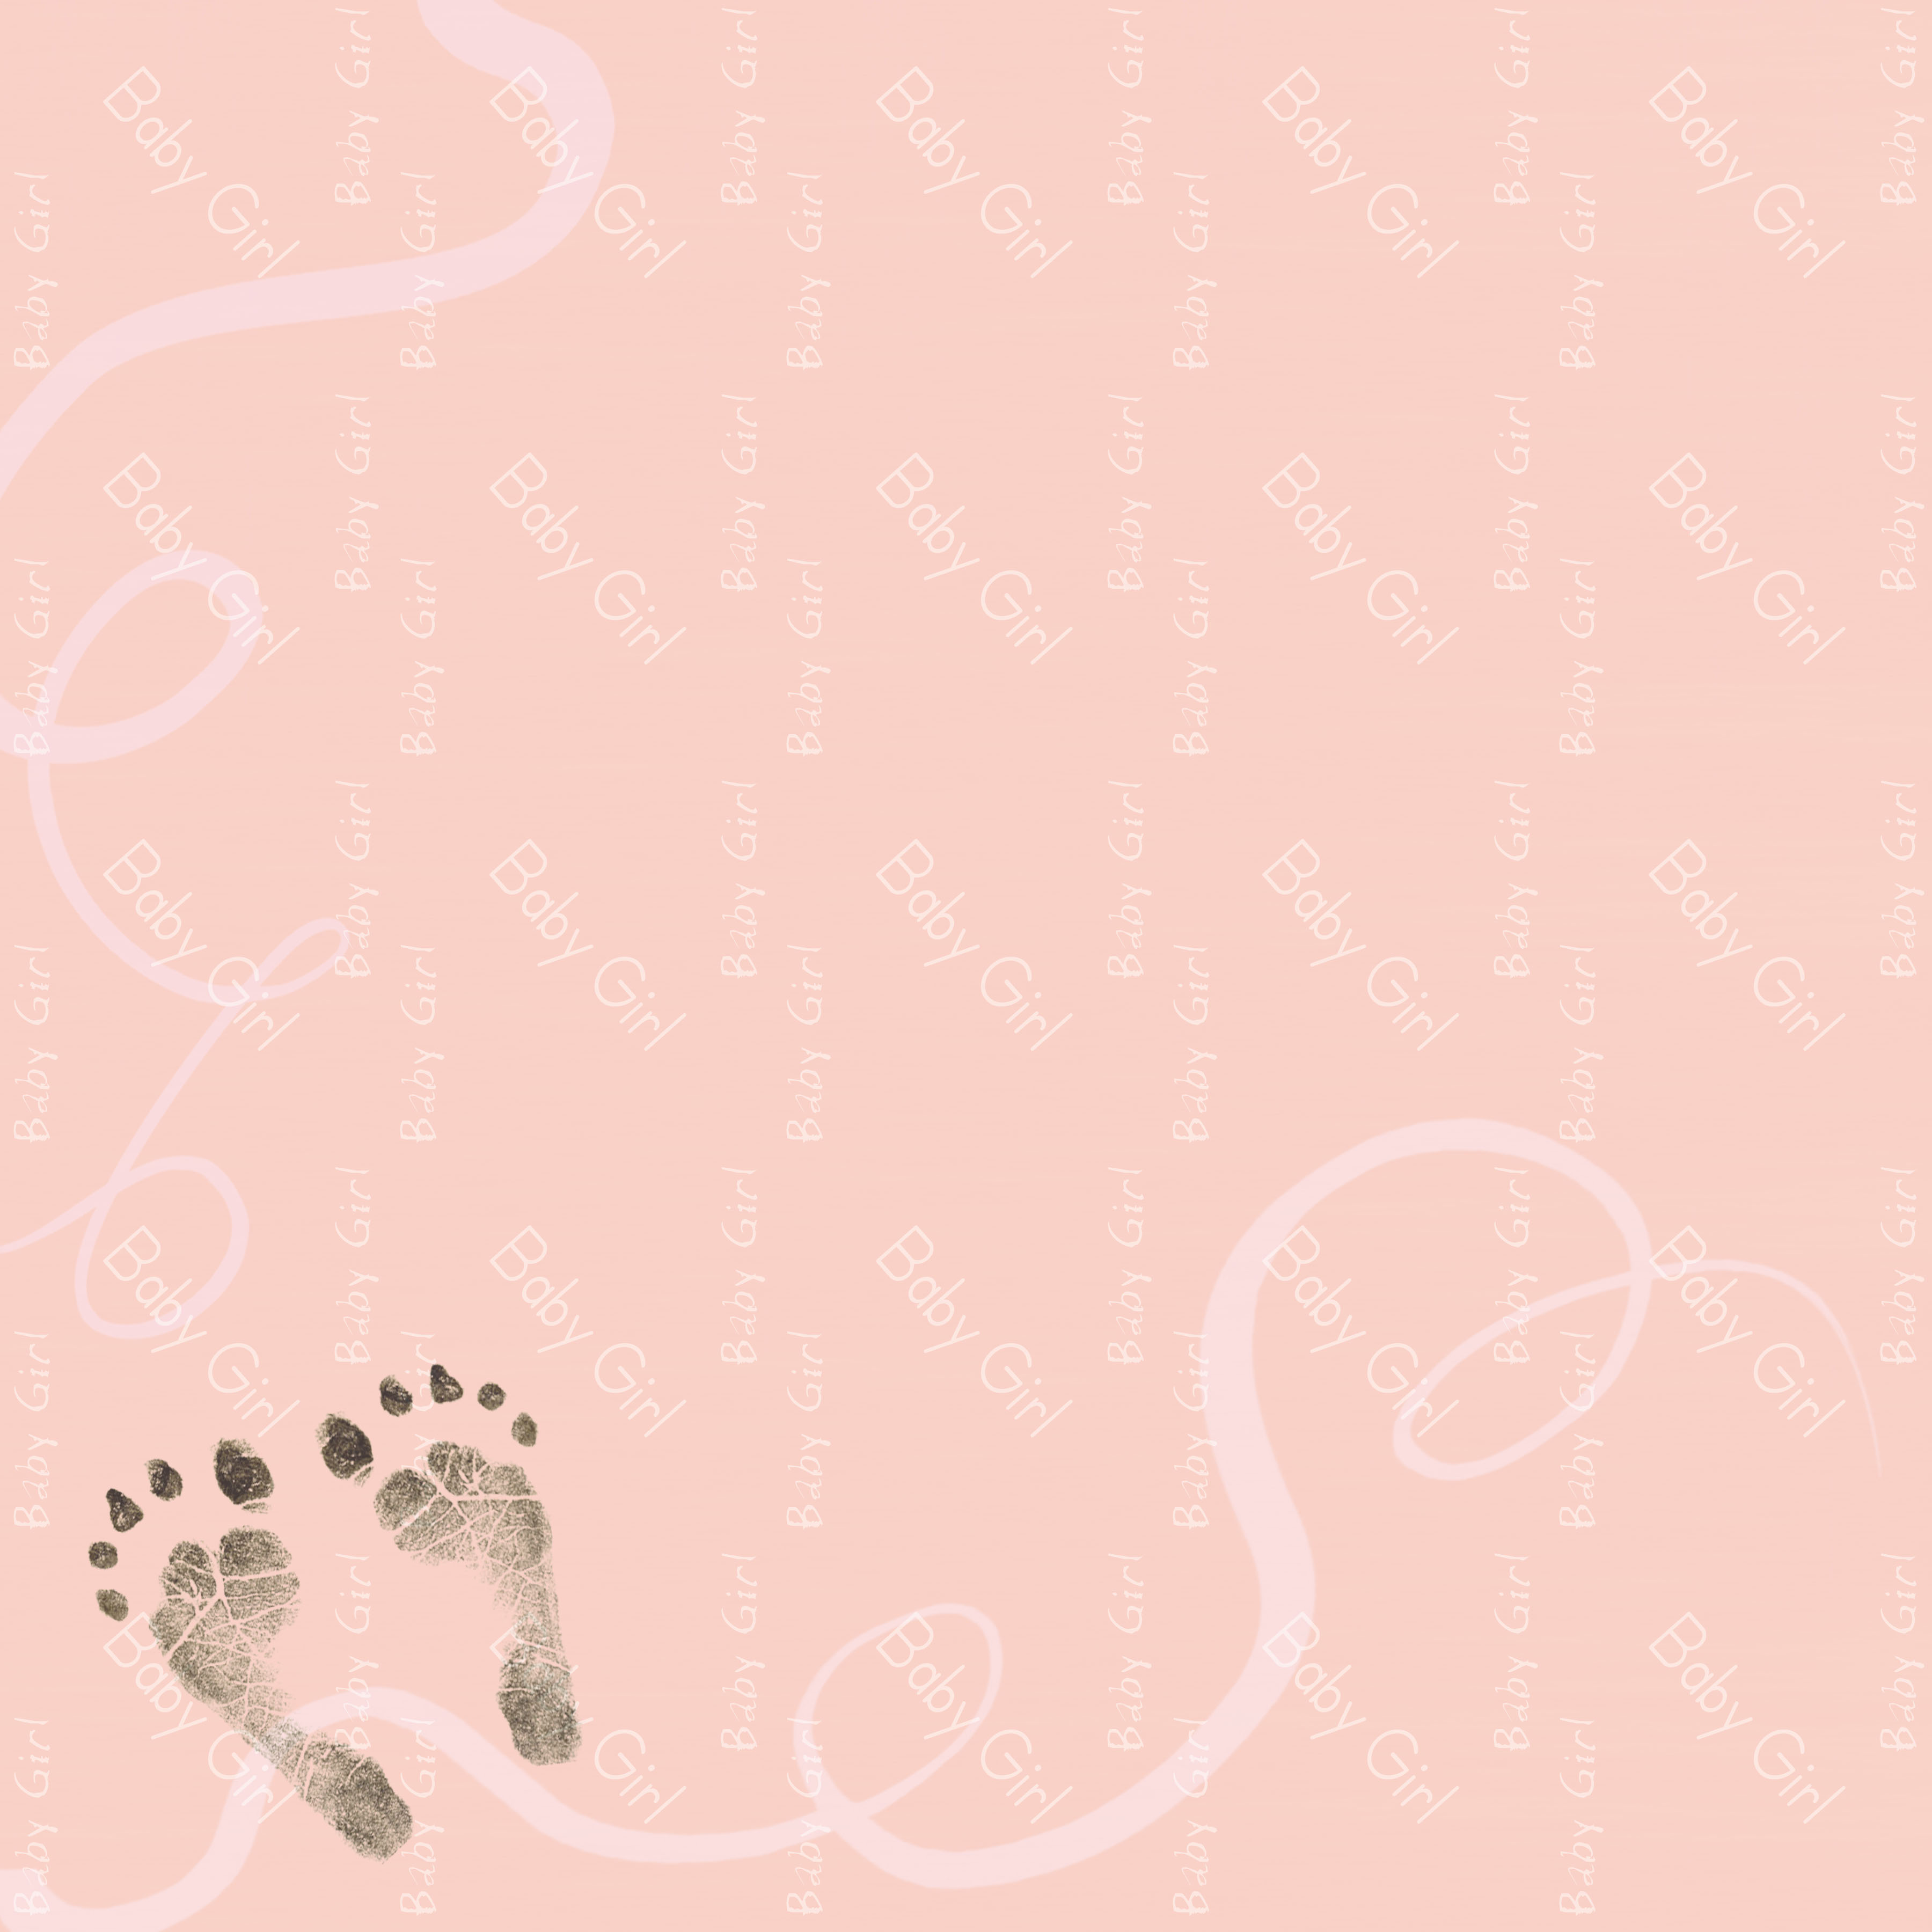 Baby Photo Background - Widescreen HD Wallpapers